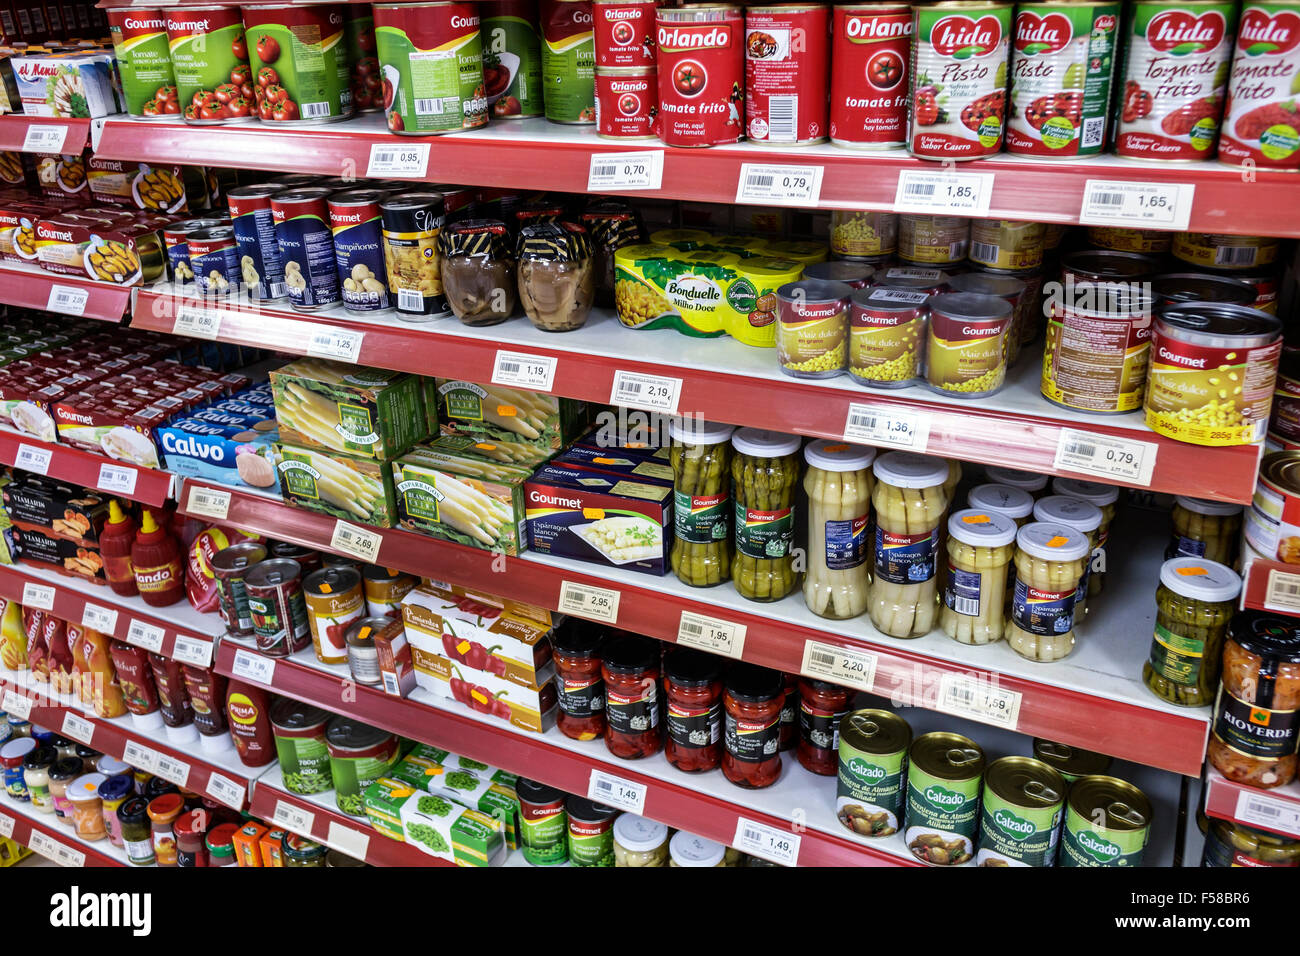 Toledo Spain,Europe,Spanish,Hispanic canned food,vegetables,tomato sauce,can,jar,grocery store,supermarket,display case sale,shelf shelves,interior in Stock Photo